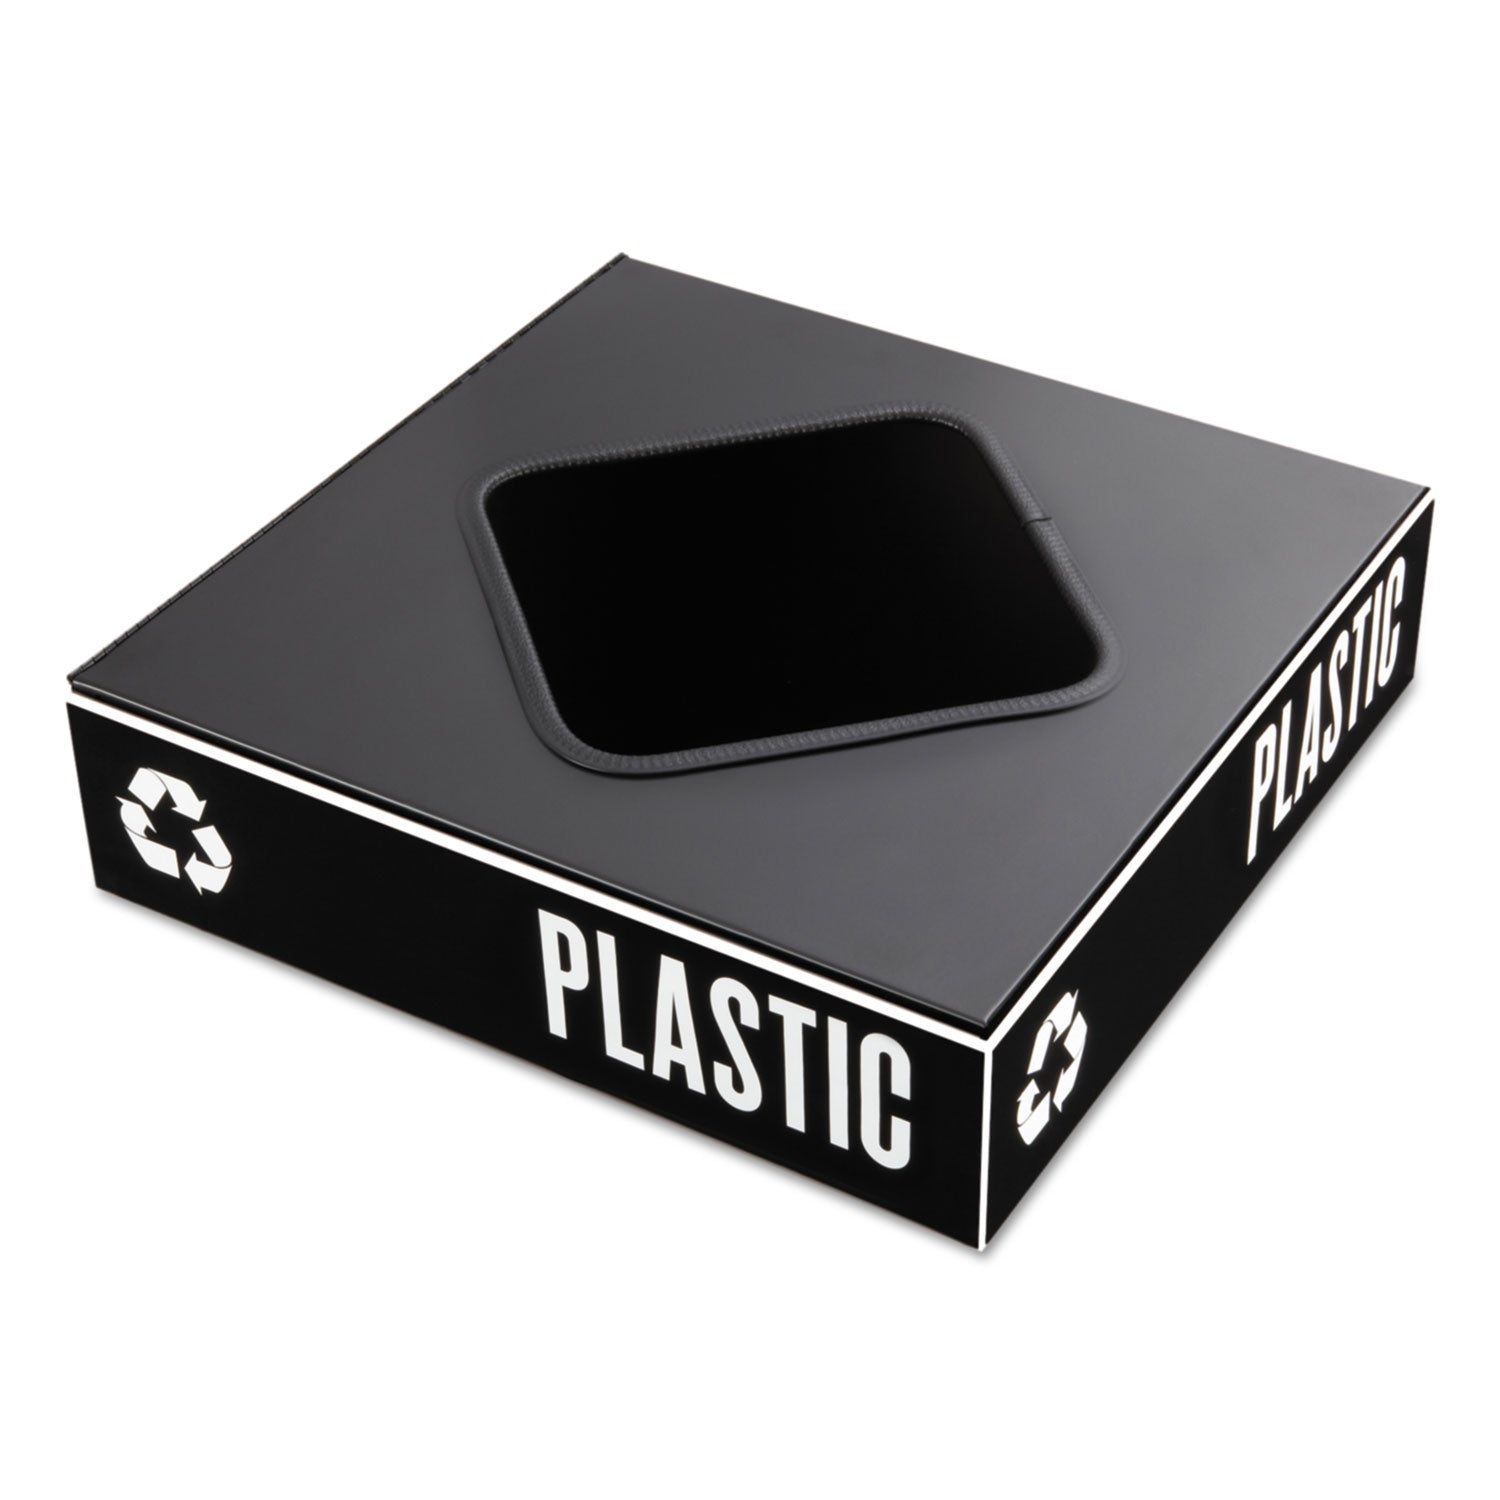 Public Square Recycling Container Lid, Square Opening, 15.25w x 15.25d x 2h, Black - 